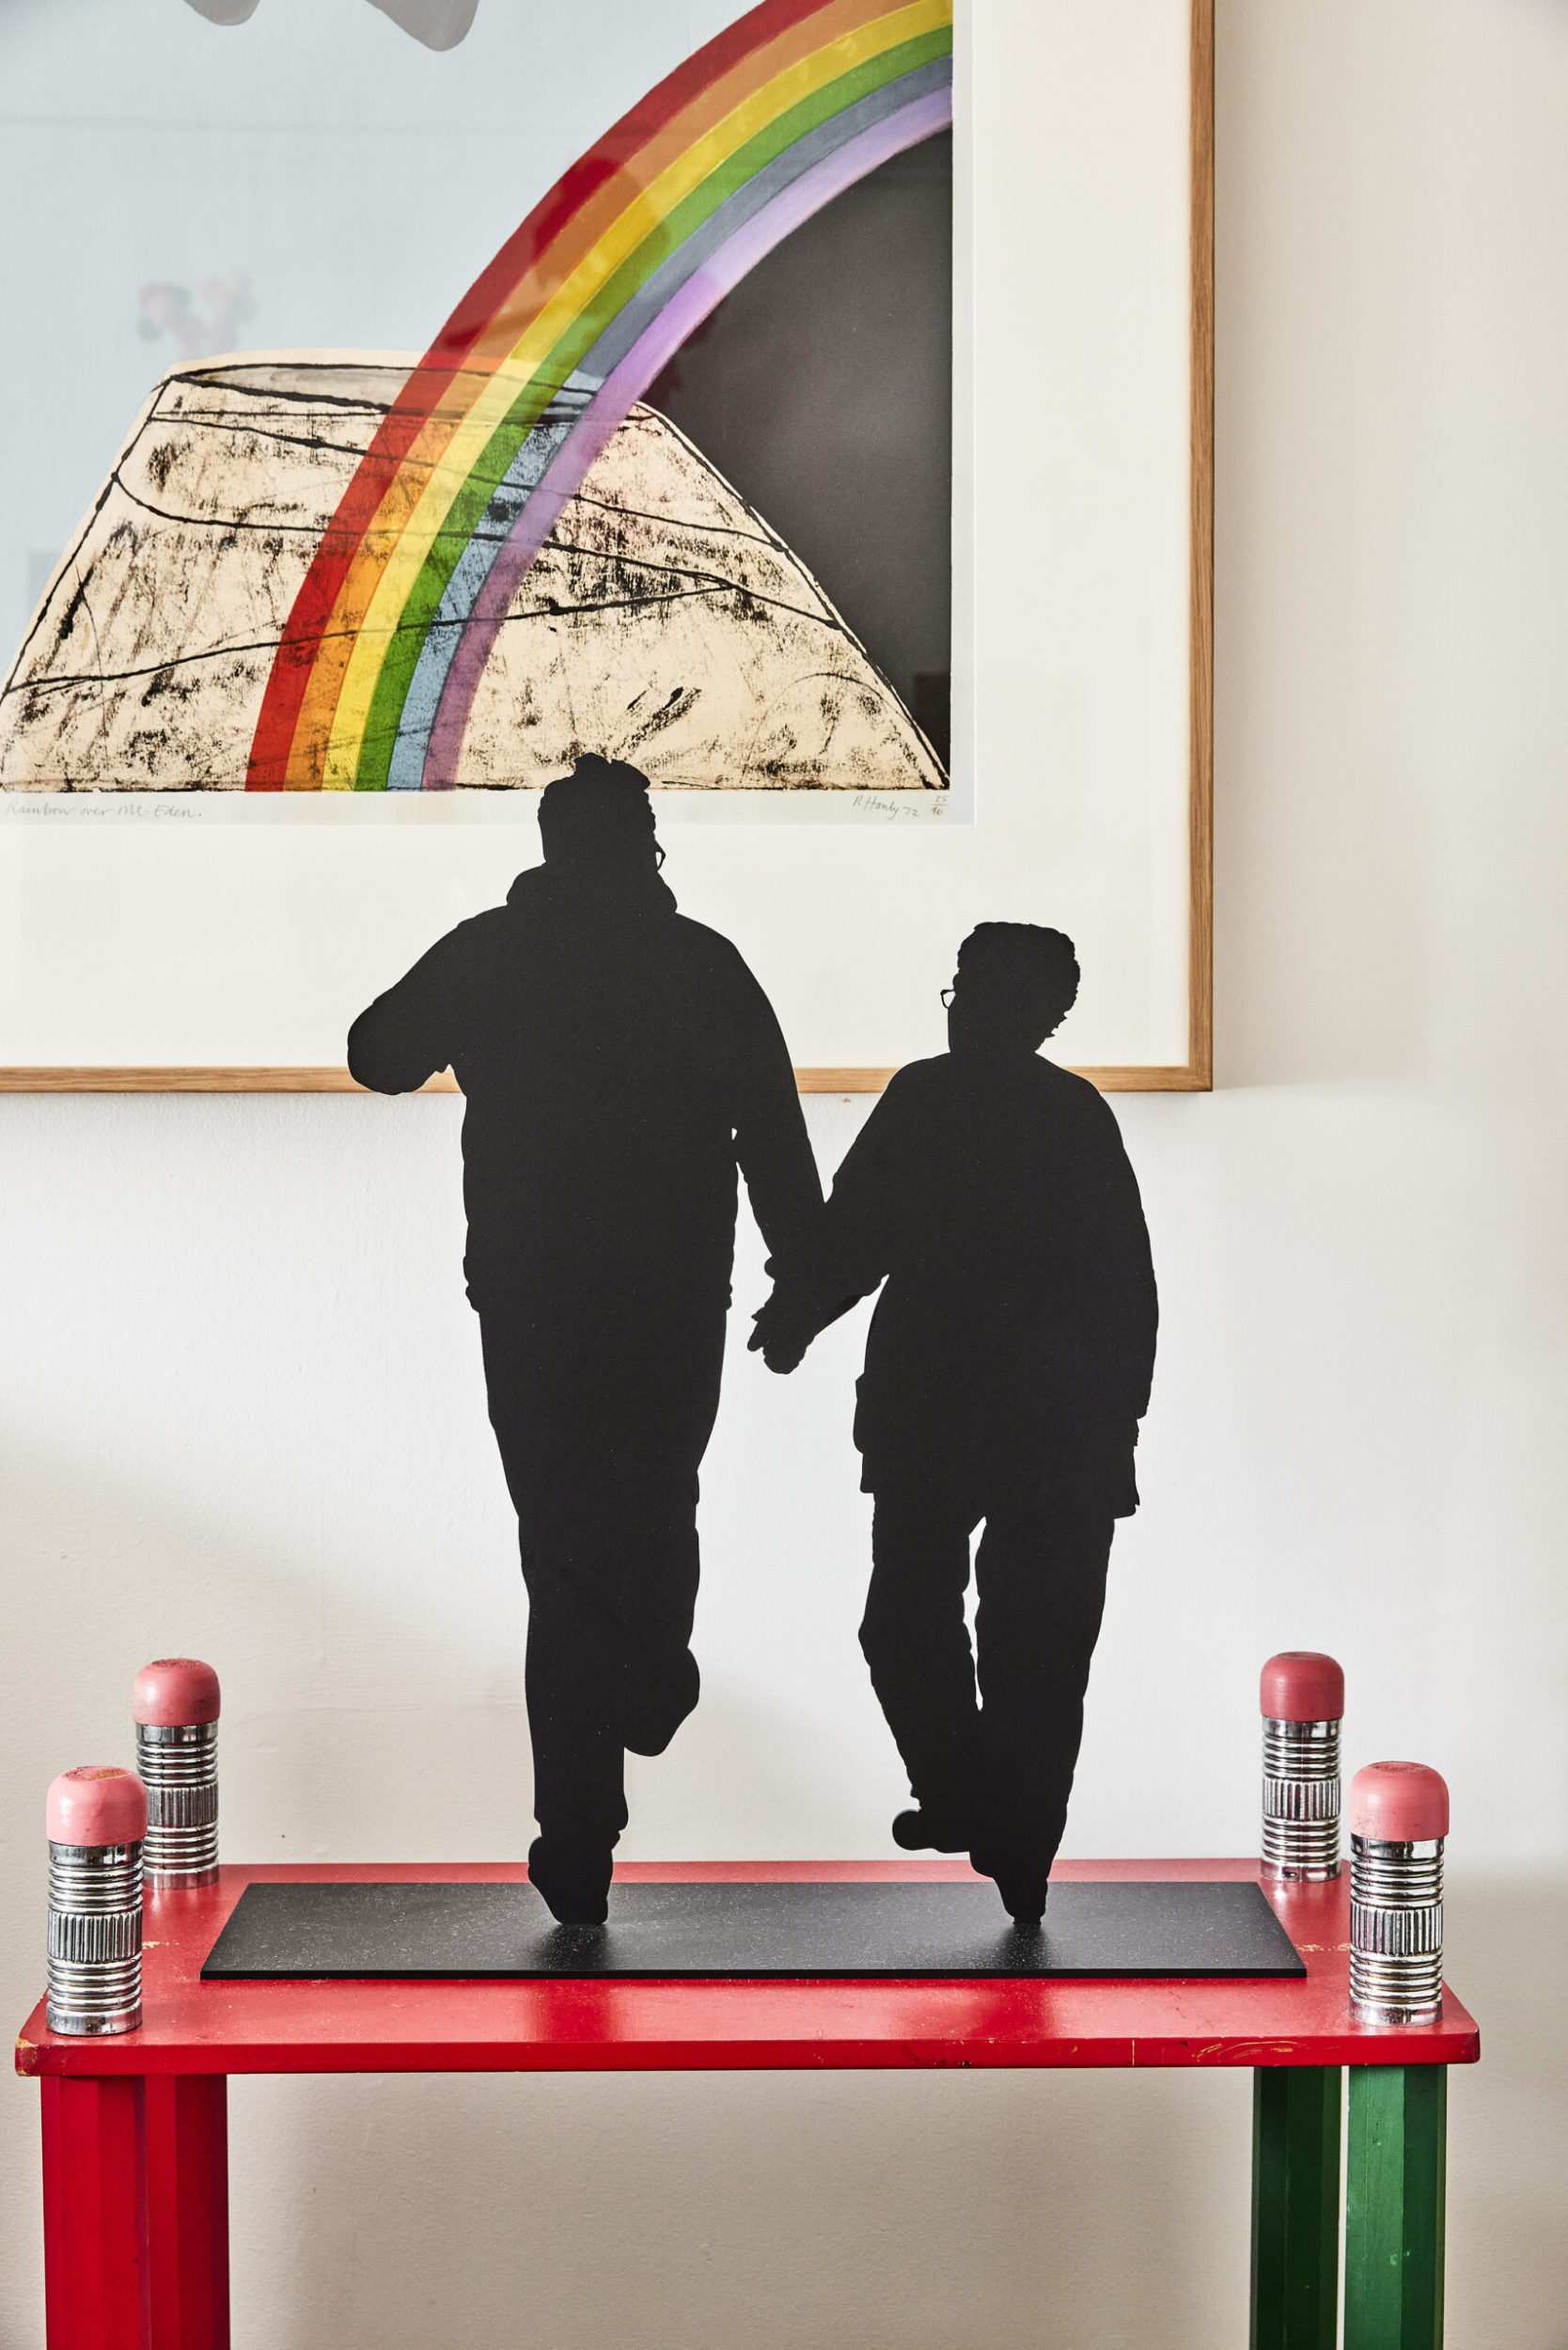 A black sculpture by artist Wayne Youle depicting David Alsop walking while holding hands with his mother on a red table